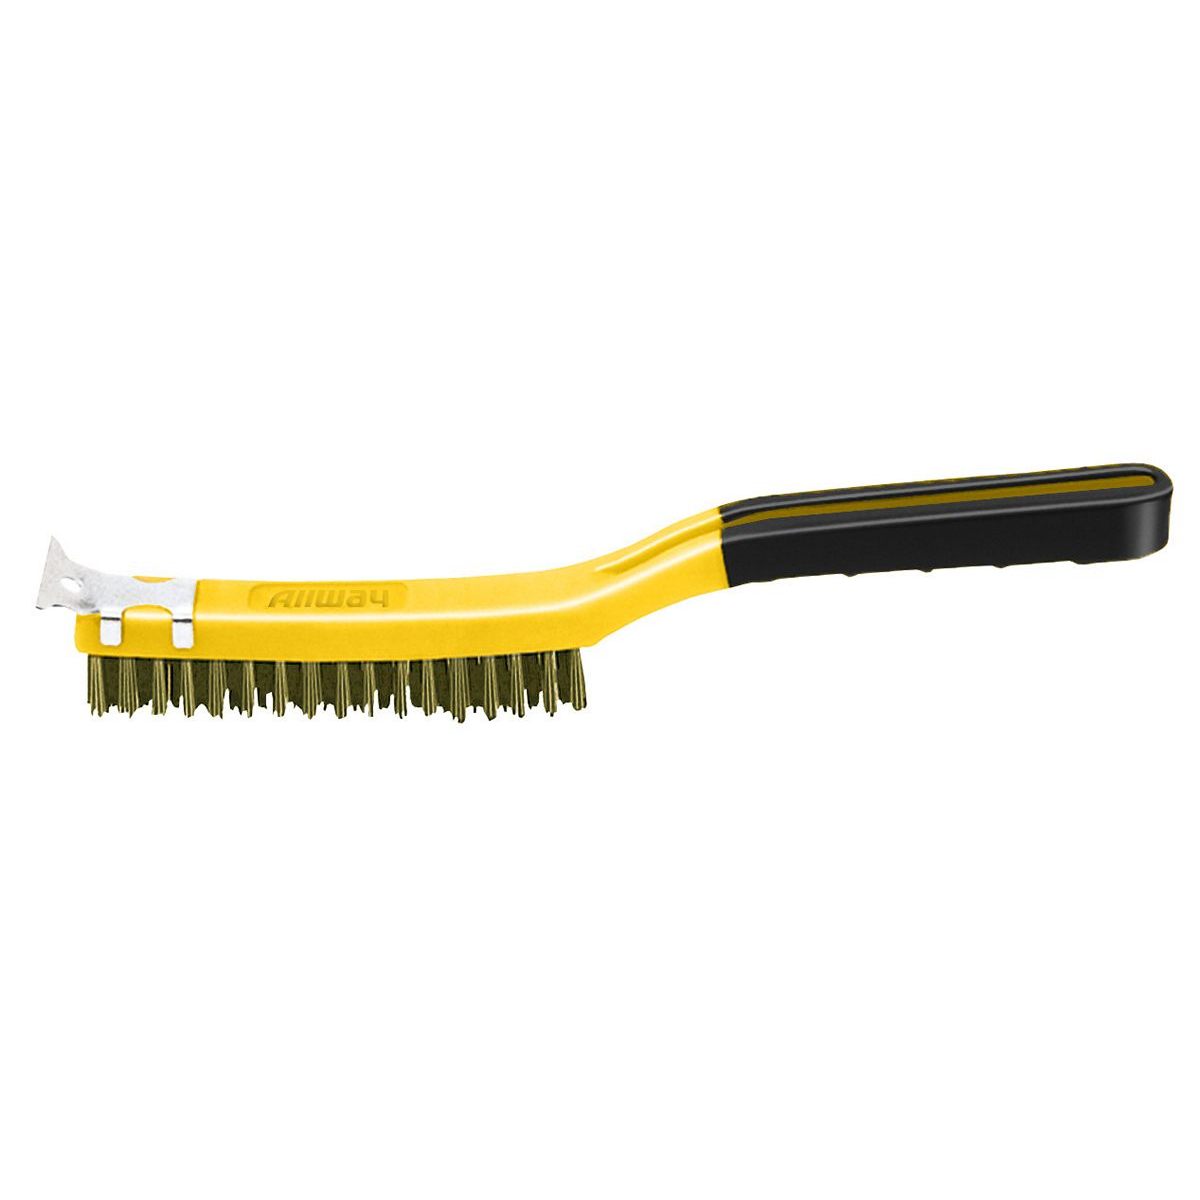 SB319/BB) 3 x 19 Soft Grip Brass Wire Brush W/Scraper, Labelled » ALLWAY®  The Tools You Ask For By Name